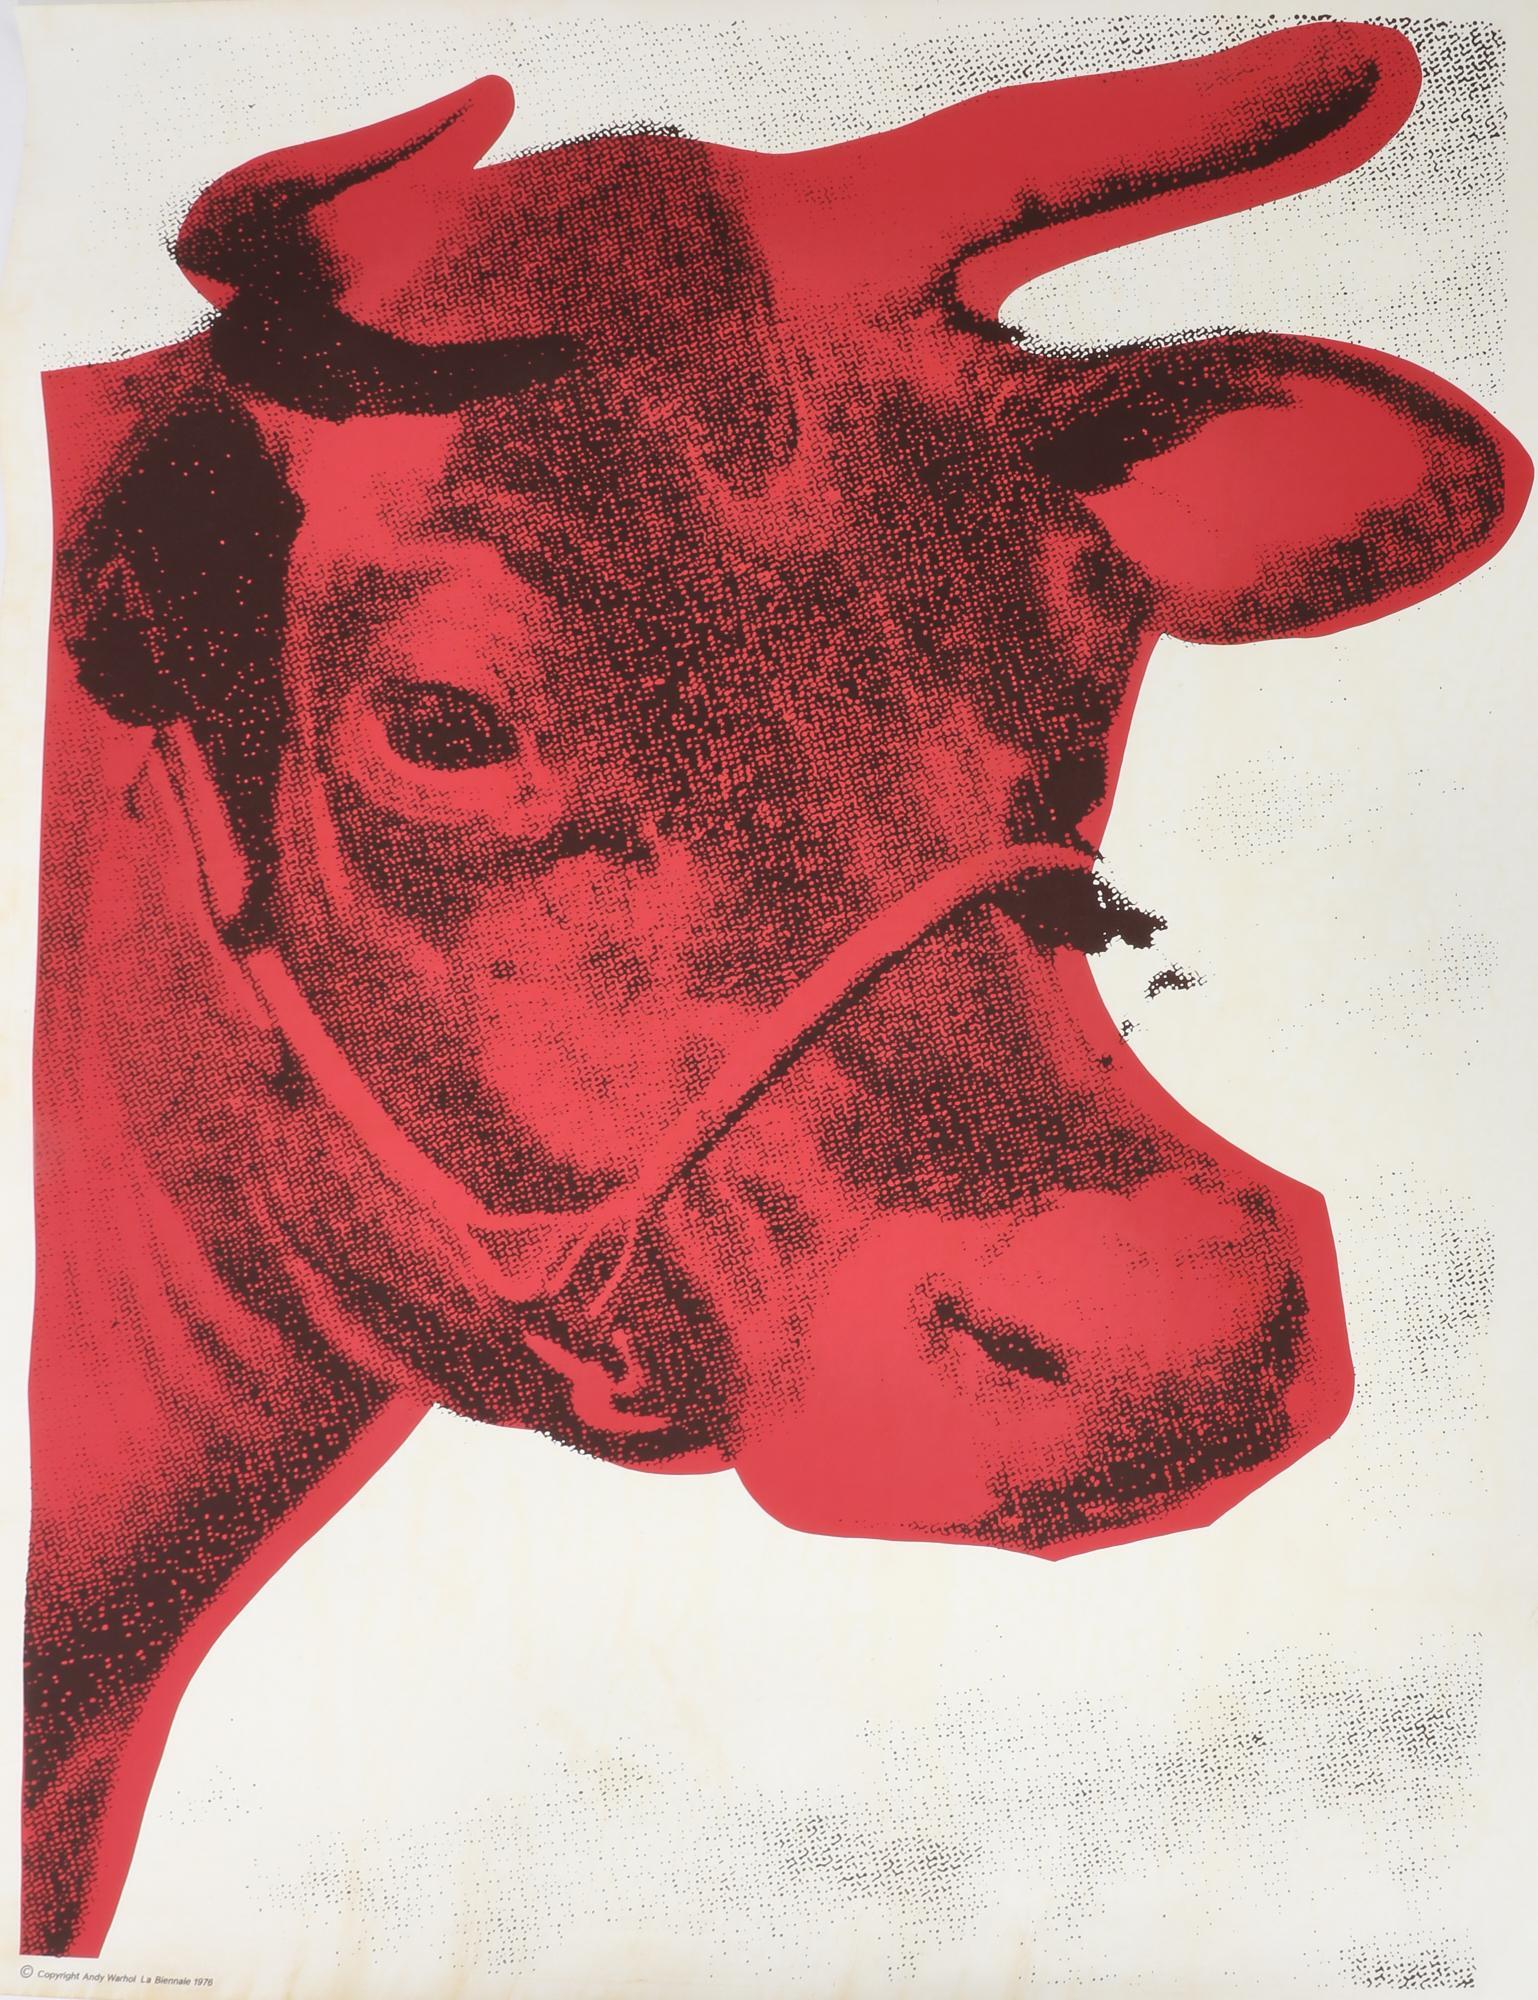 What color is the cow in Andy Warhol's cow wallpaper?